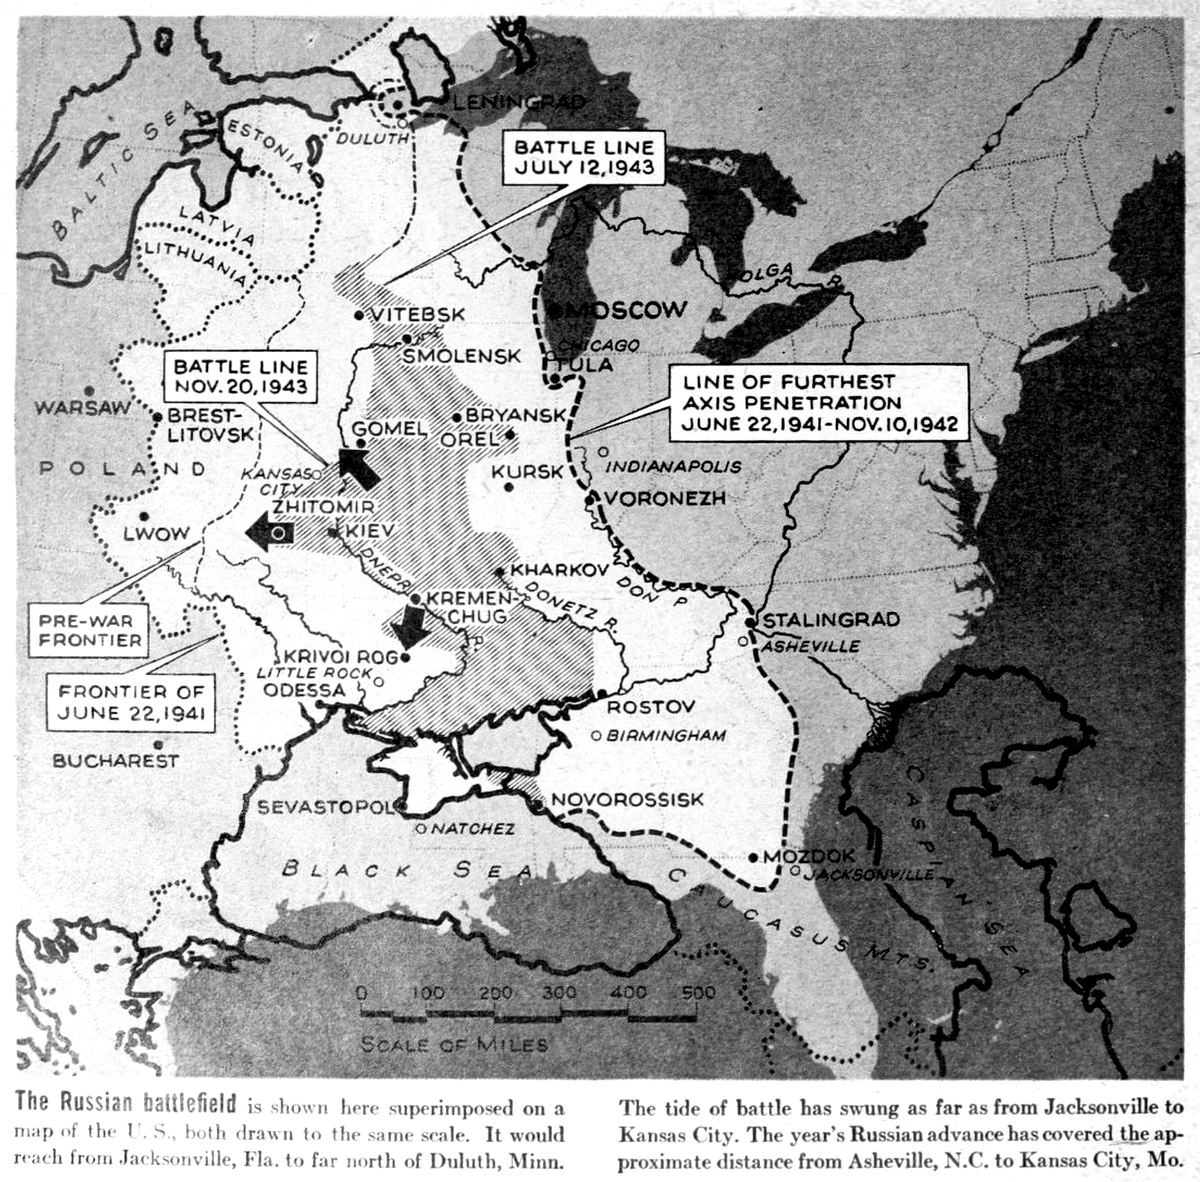 10. The Russian battlefield is shown here superimposed on a map of the U.S. (1943)  https://archive.org/details/life15octluce/page/n1077